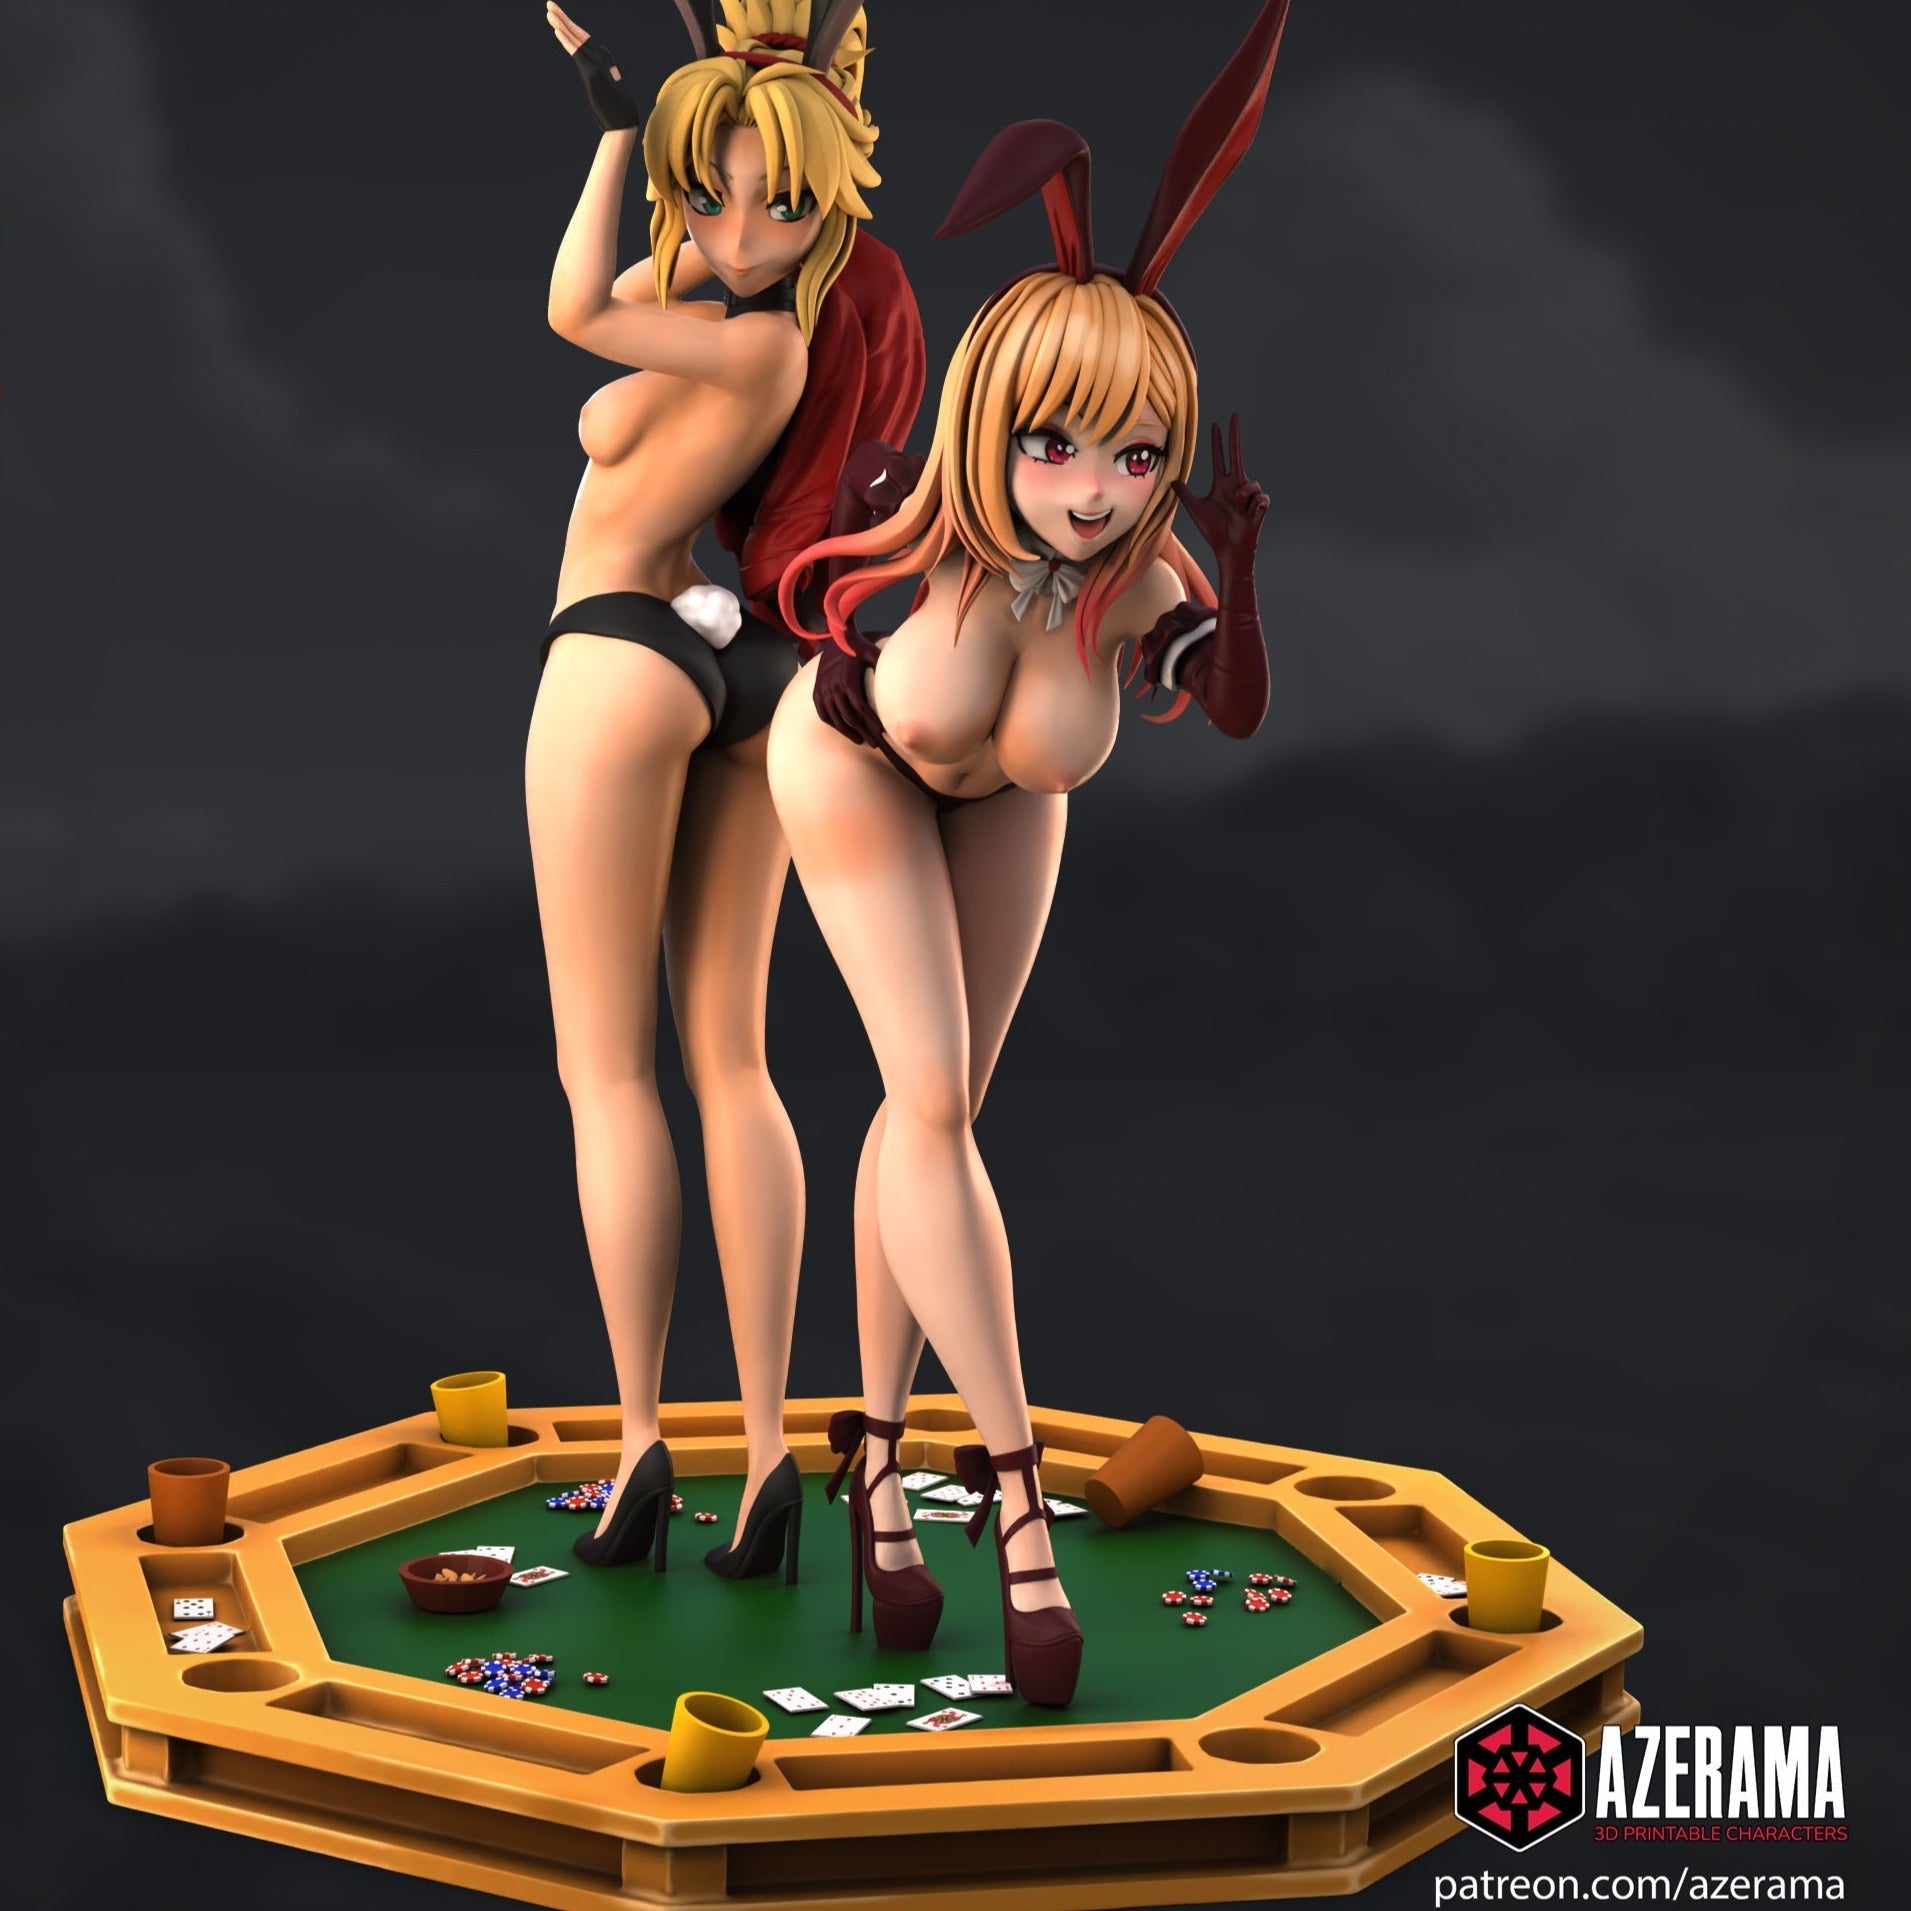 Bunny girls Mordred and Marin NSFW 3d Printed Resin Figurines Model Kit Collectable Fanart DIY by Azerama